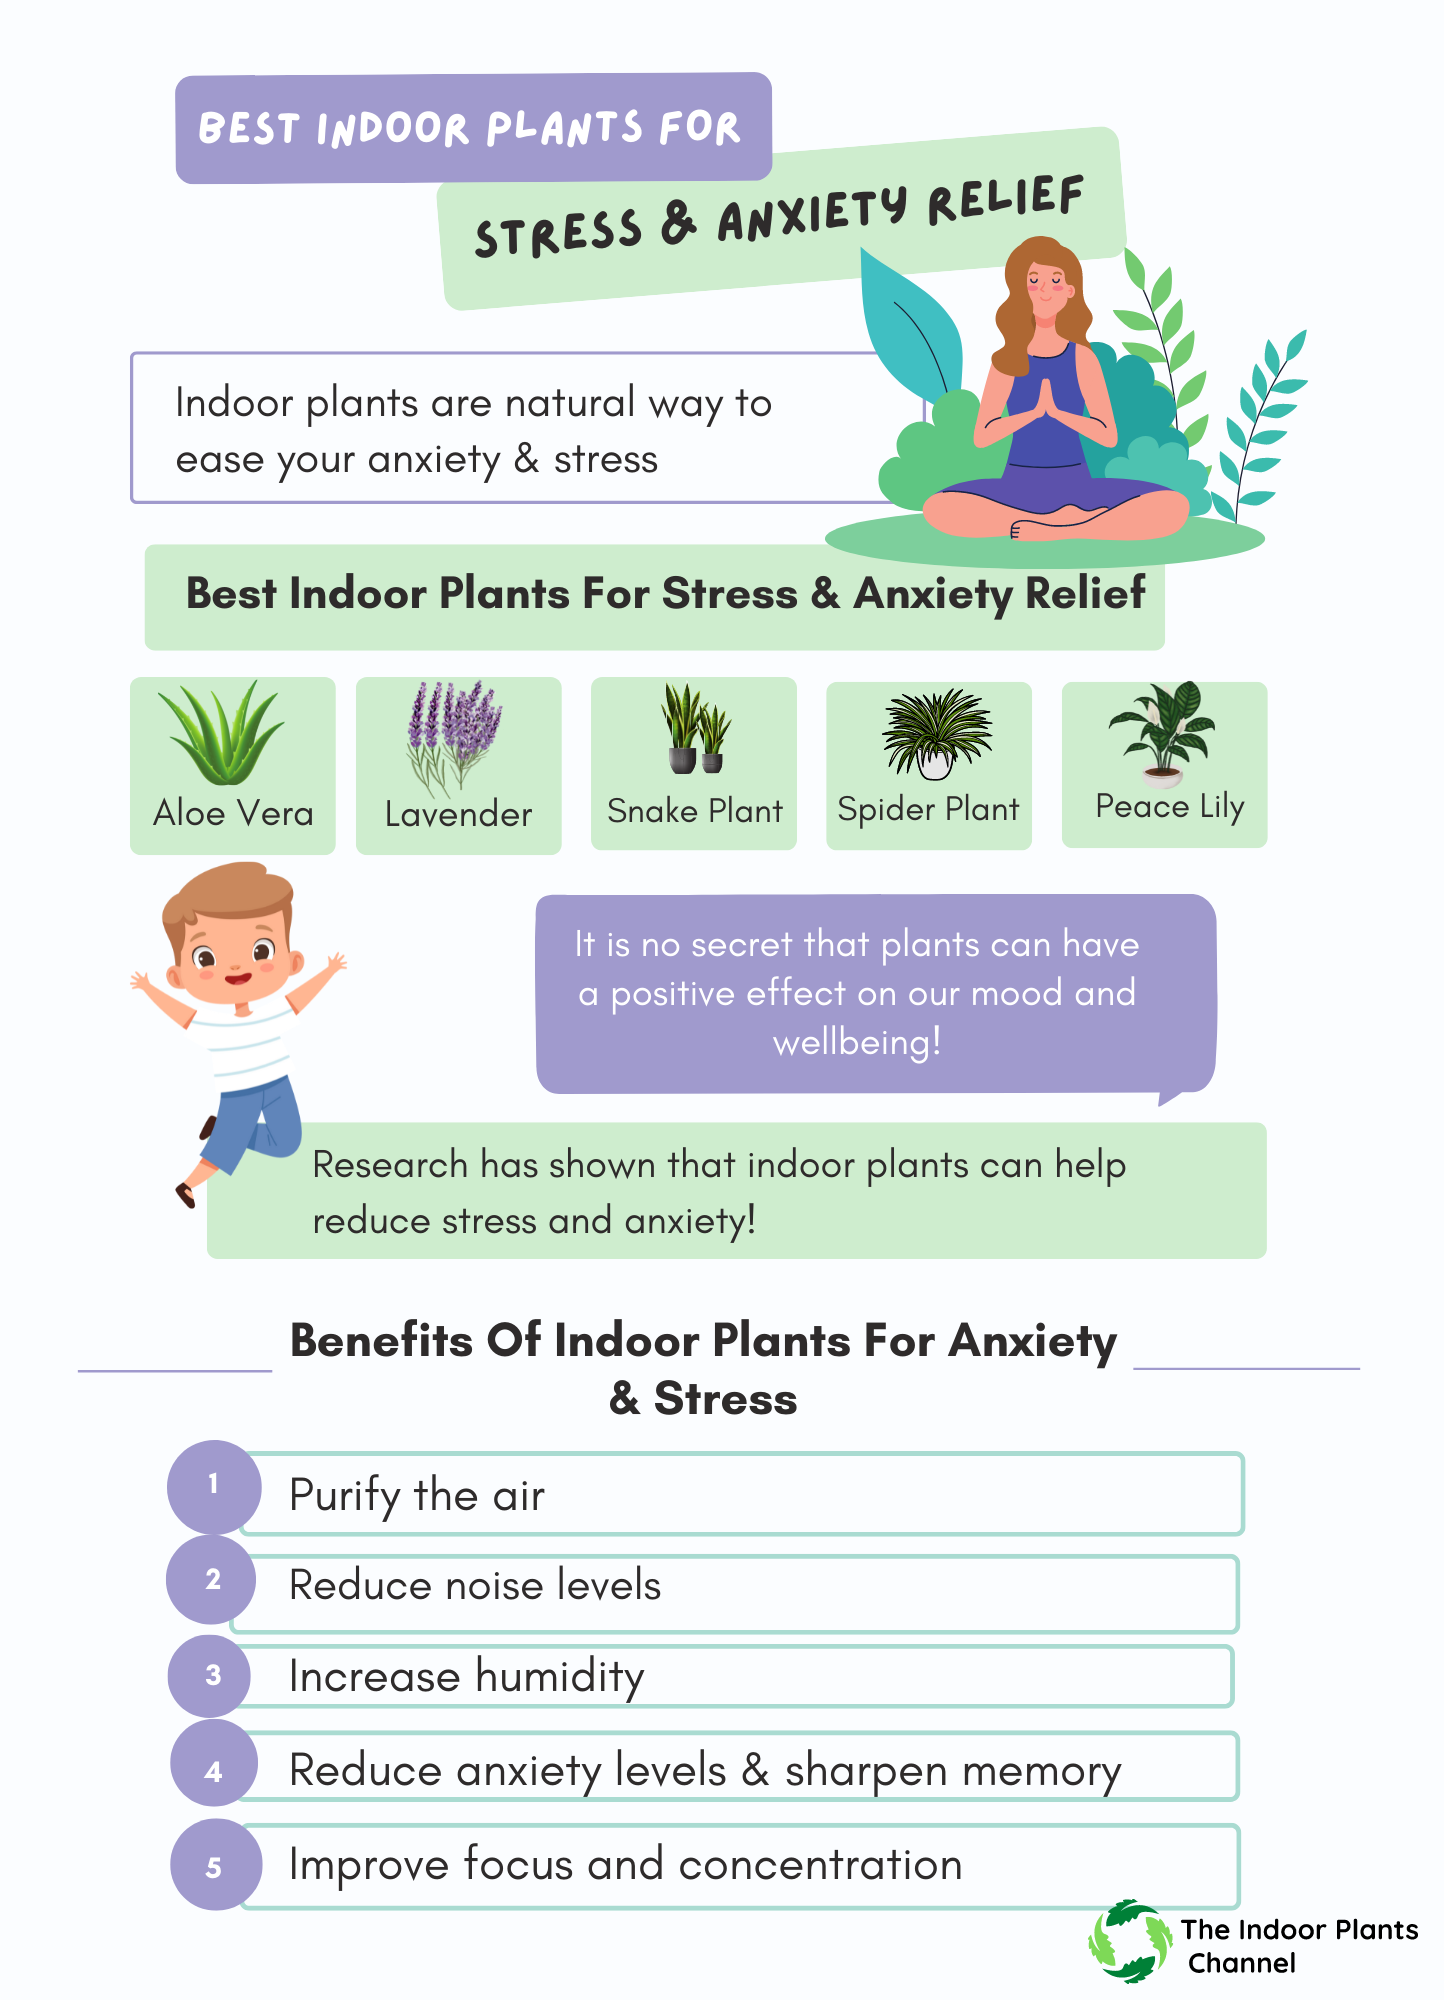 The Best Indoor Plants For Stress And Anxiety Relief